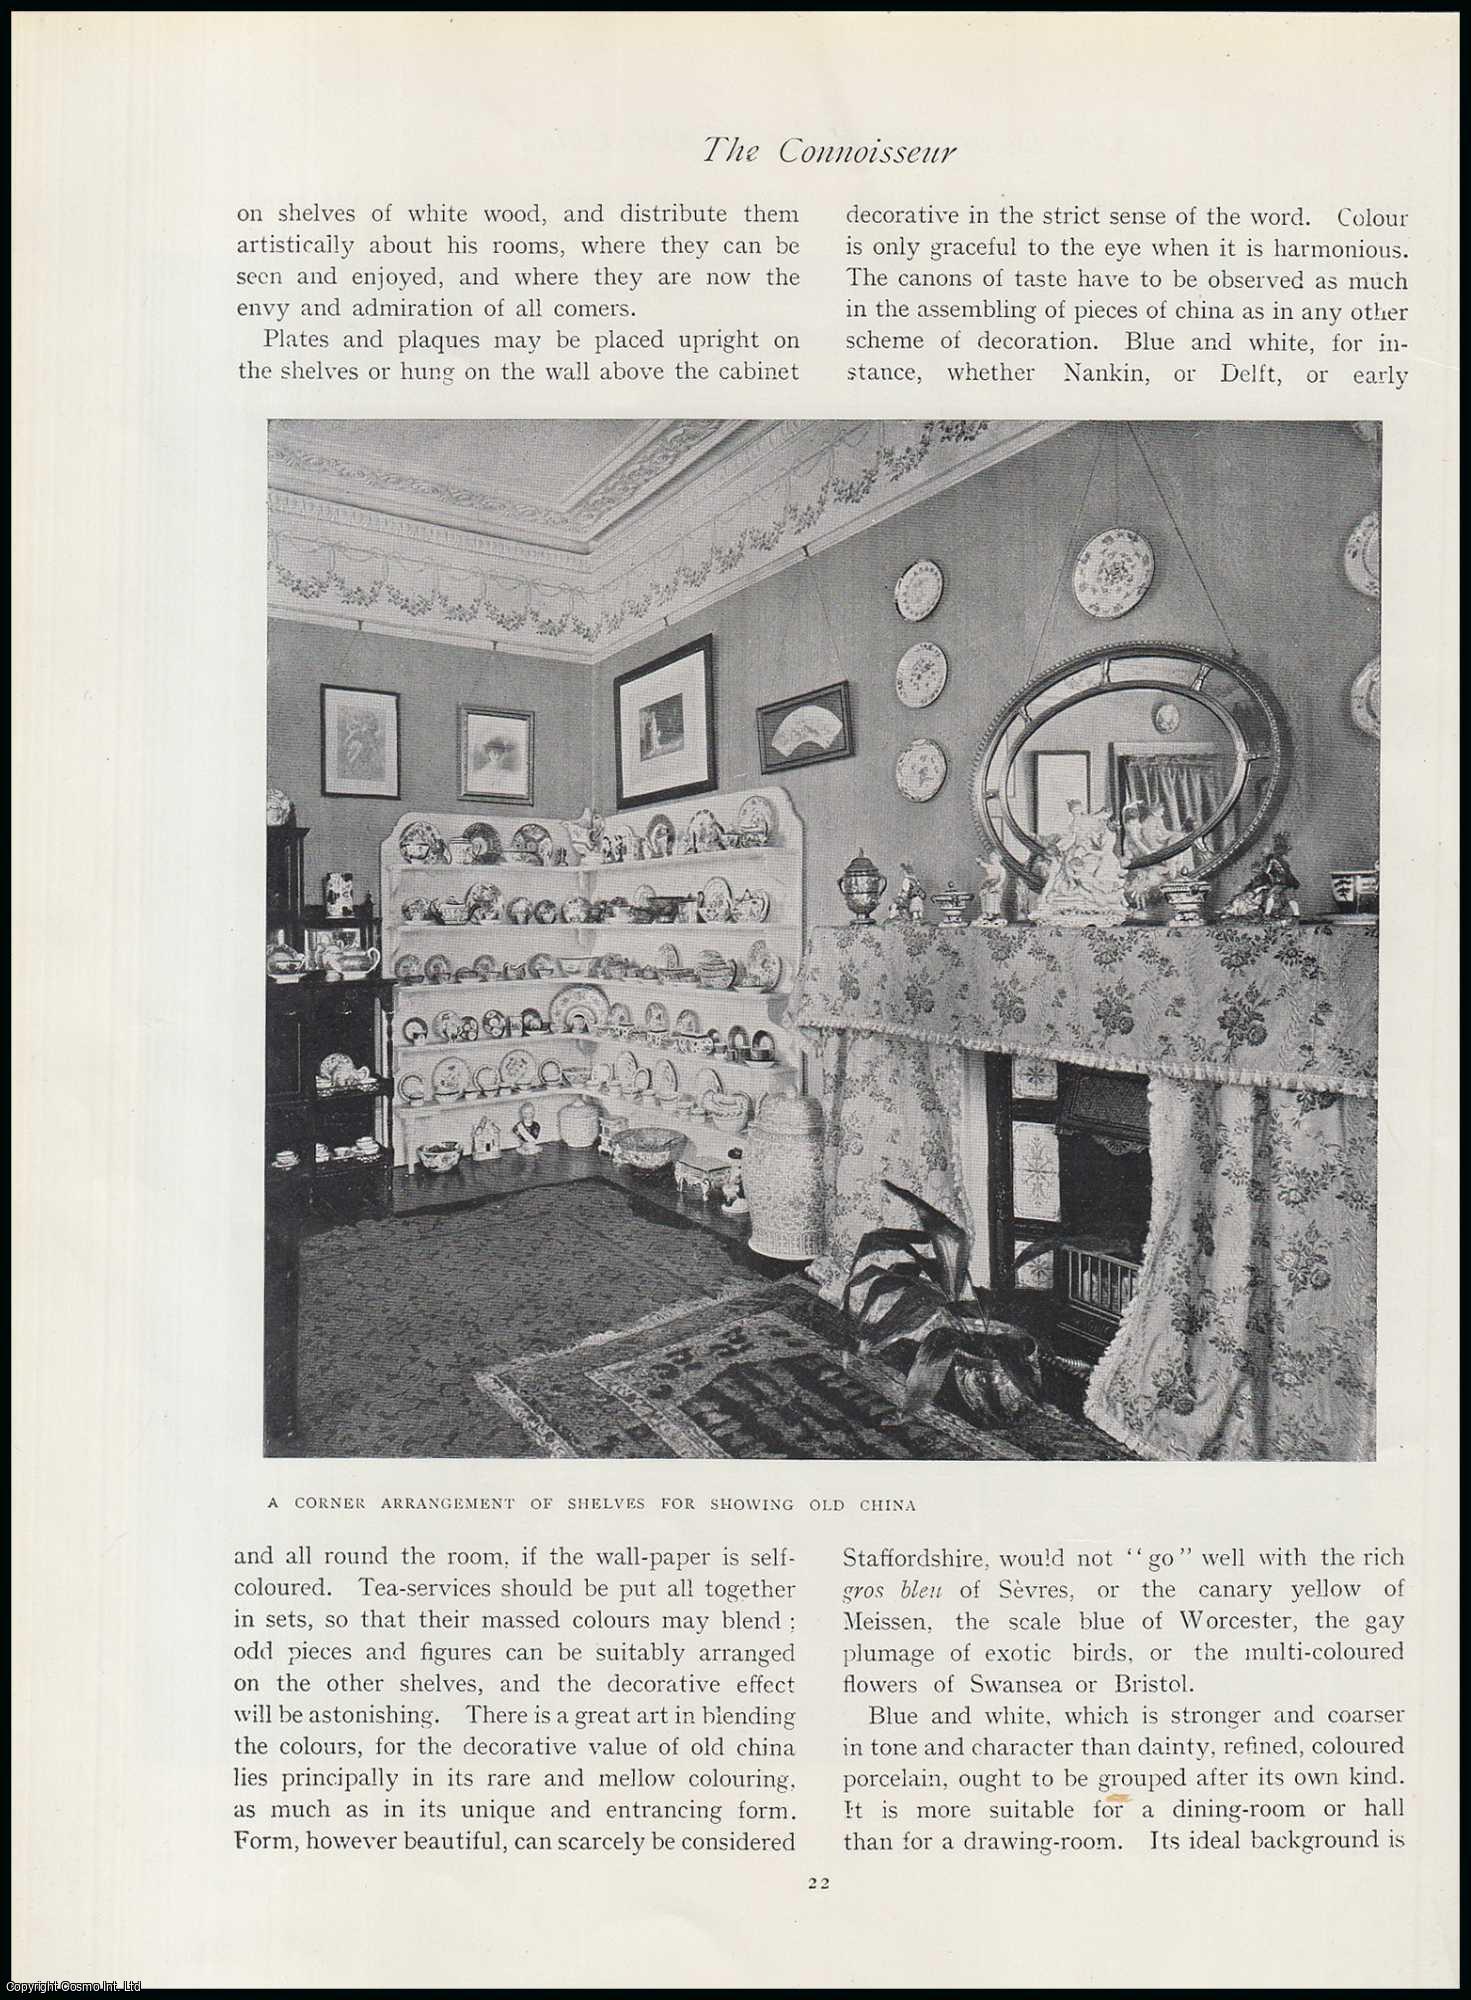 Olive Milne Rae - The Decorative Value of Old China. An original article from The Connoisseur, 1906.